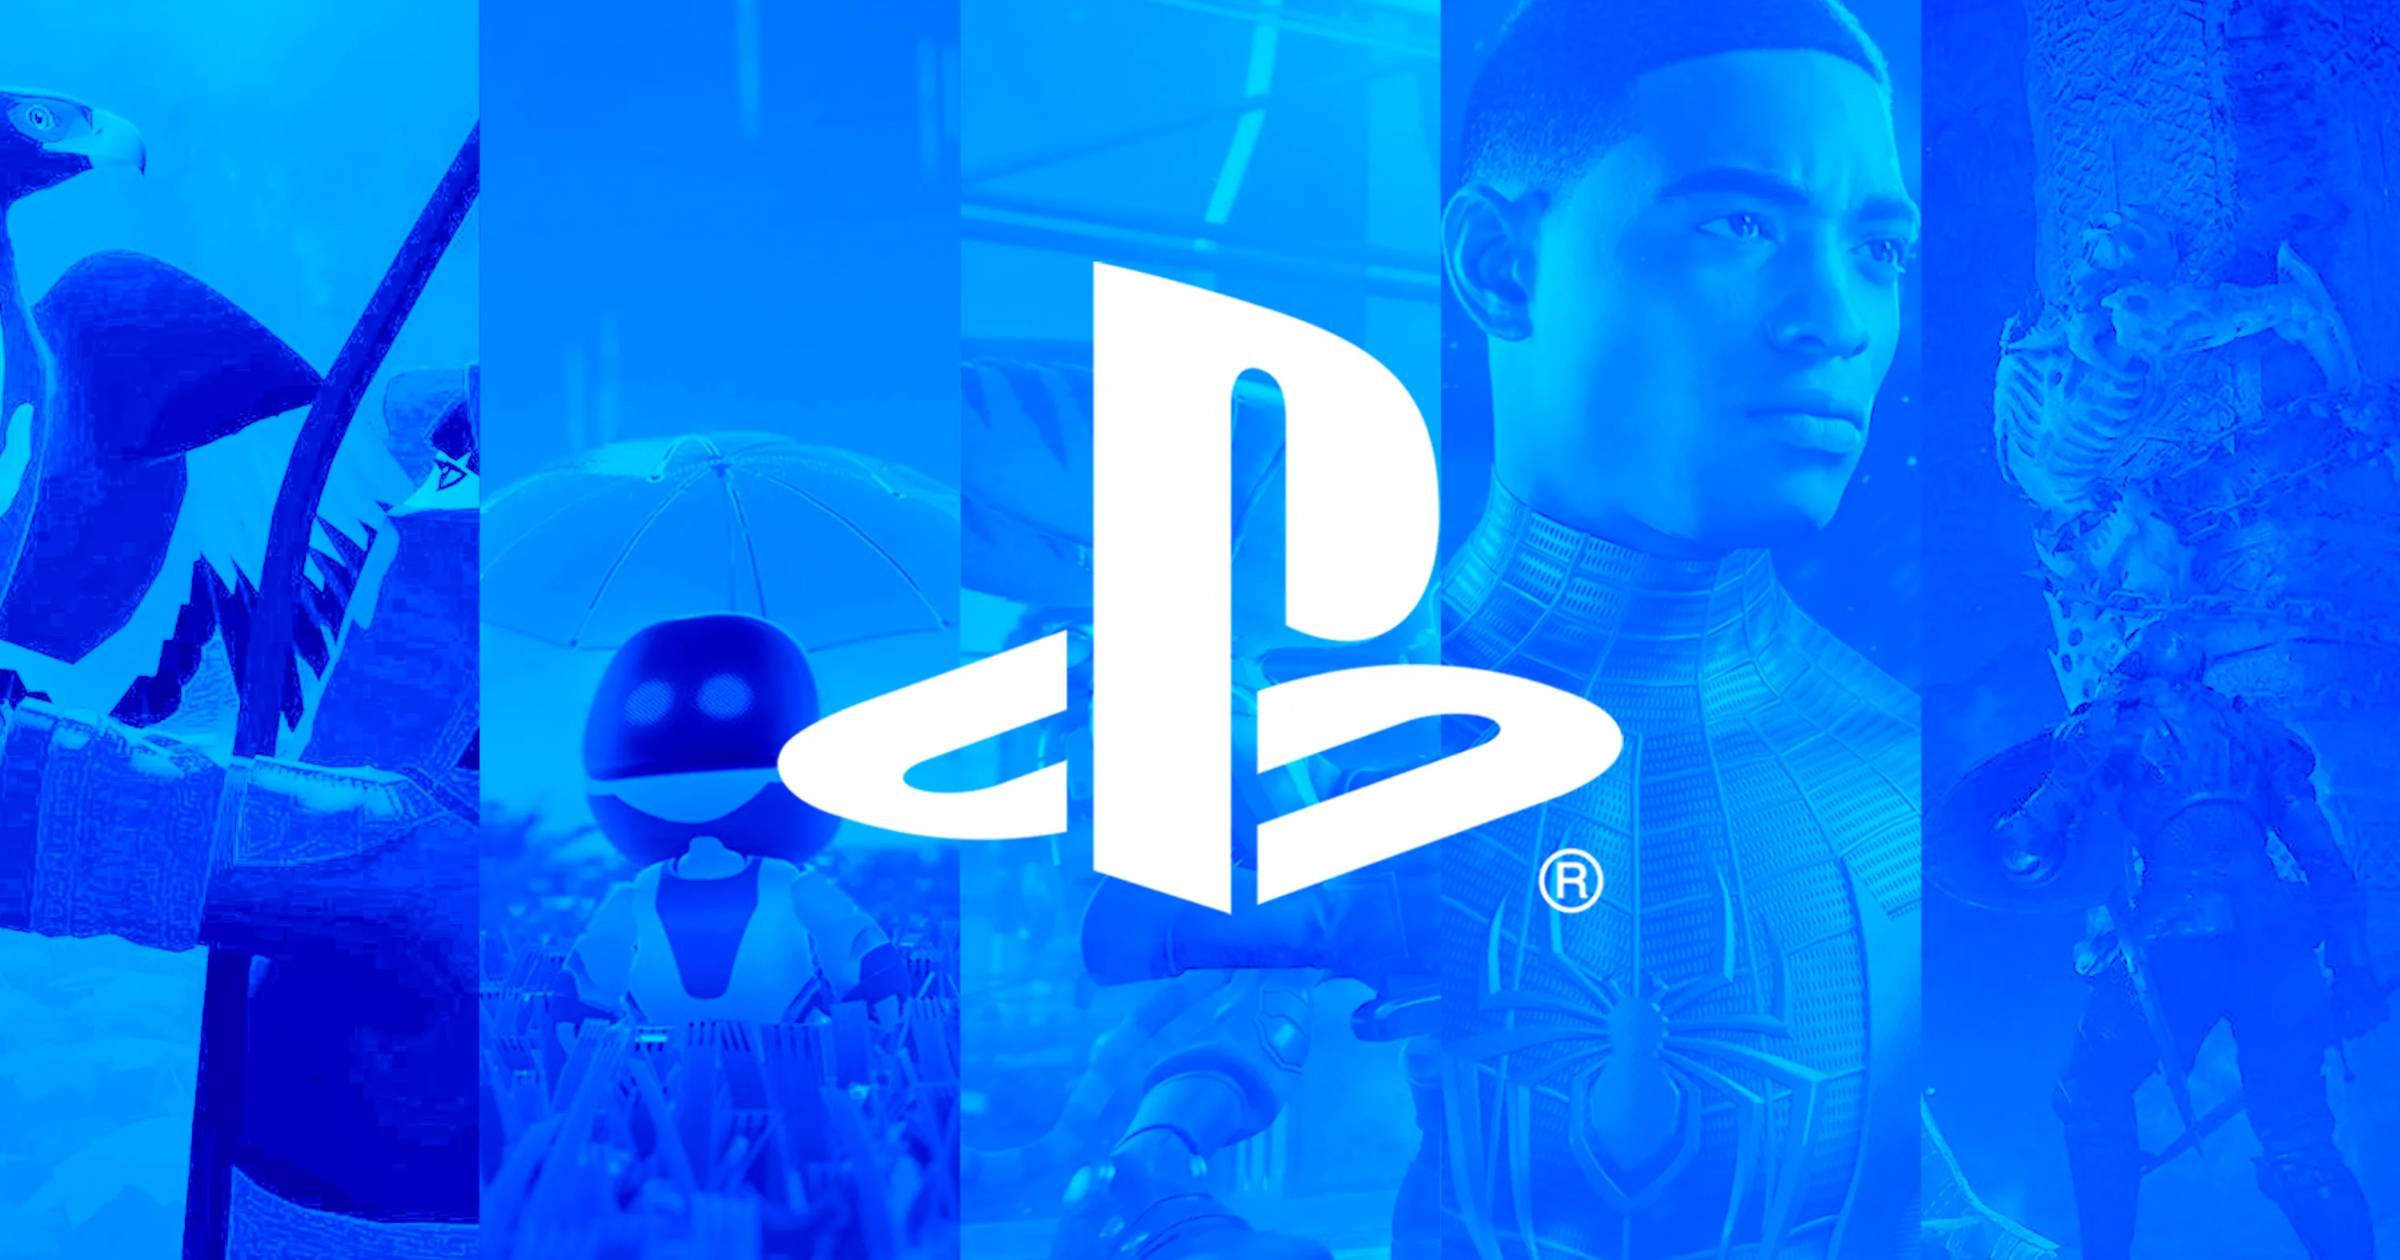 The best free PS5 games